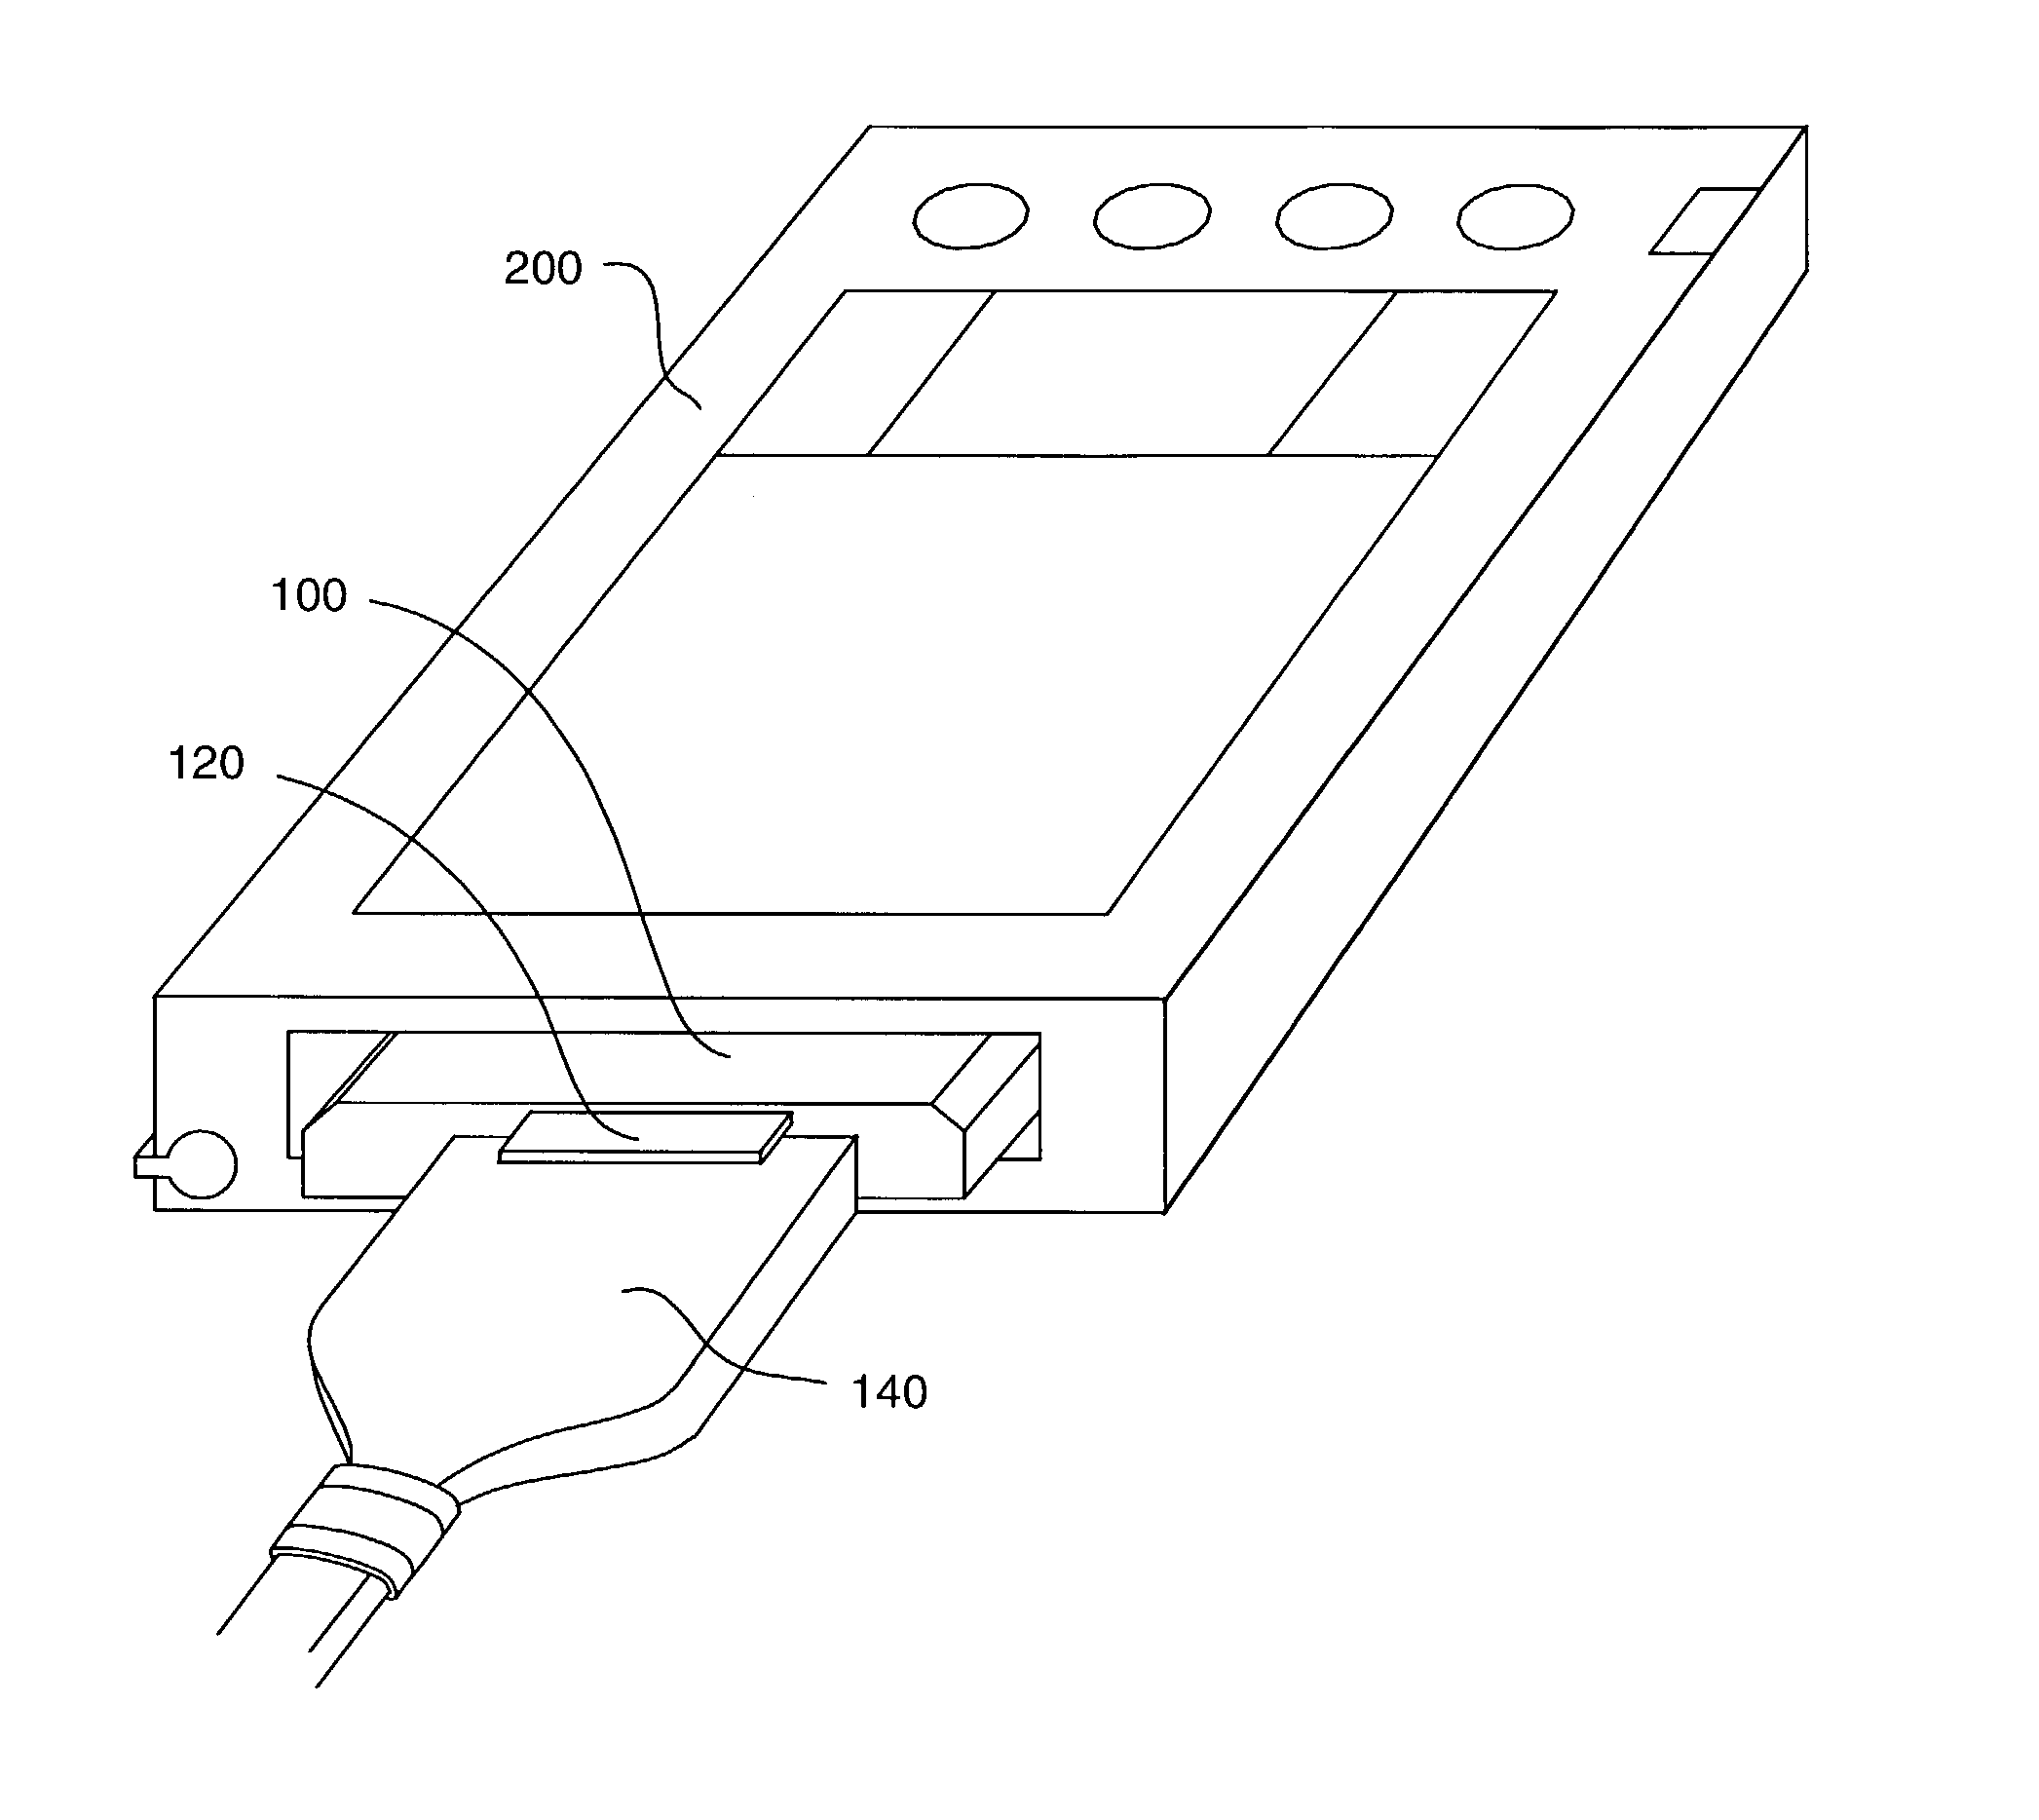 High-density removable expansion module having I/O and second-level-removable expansion memory